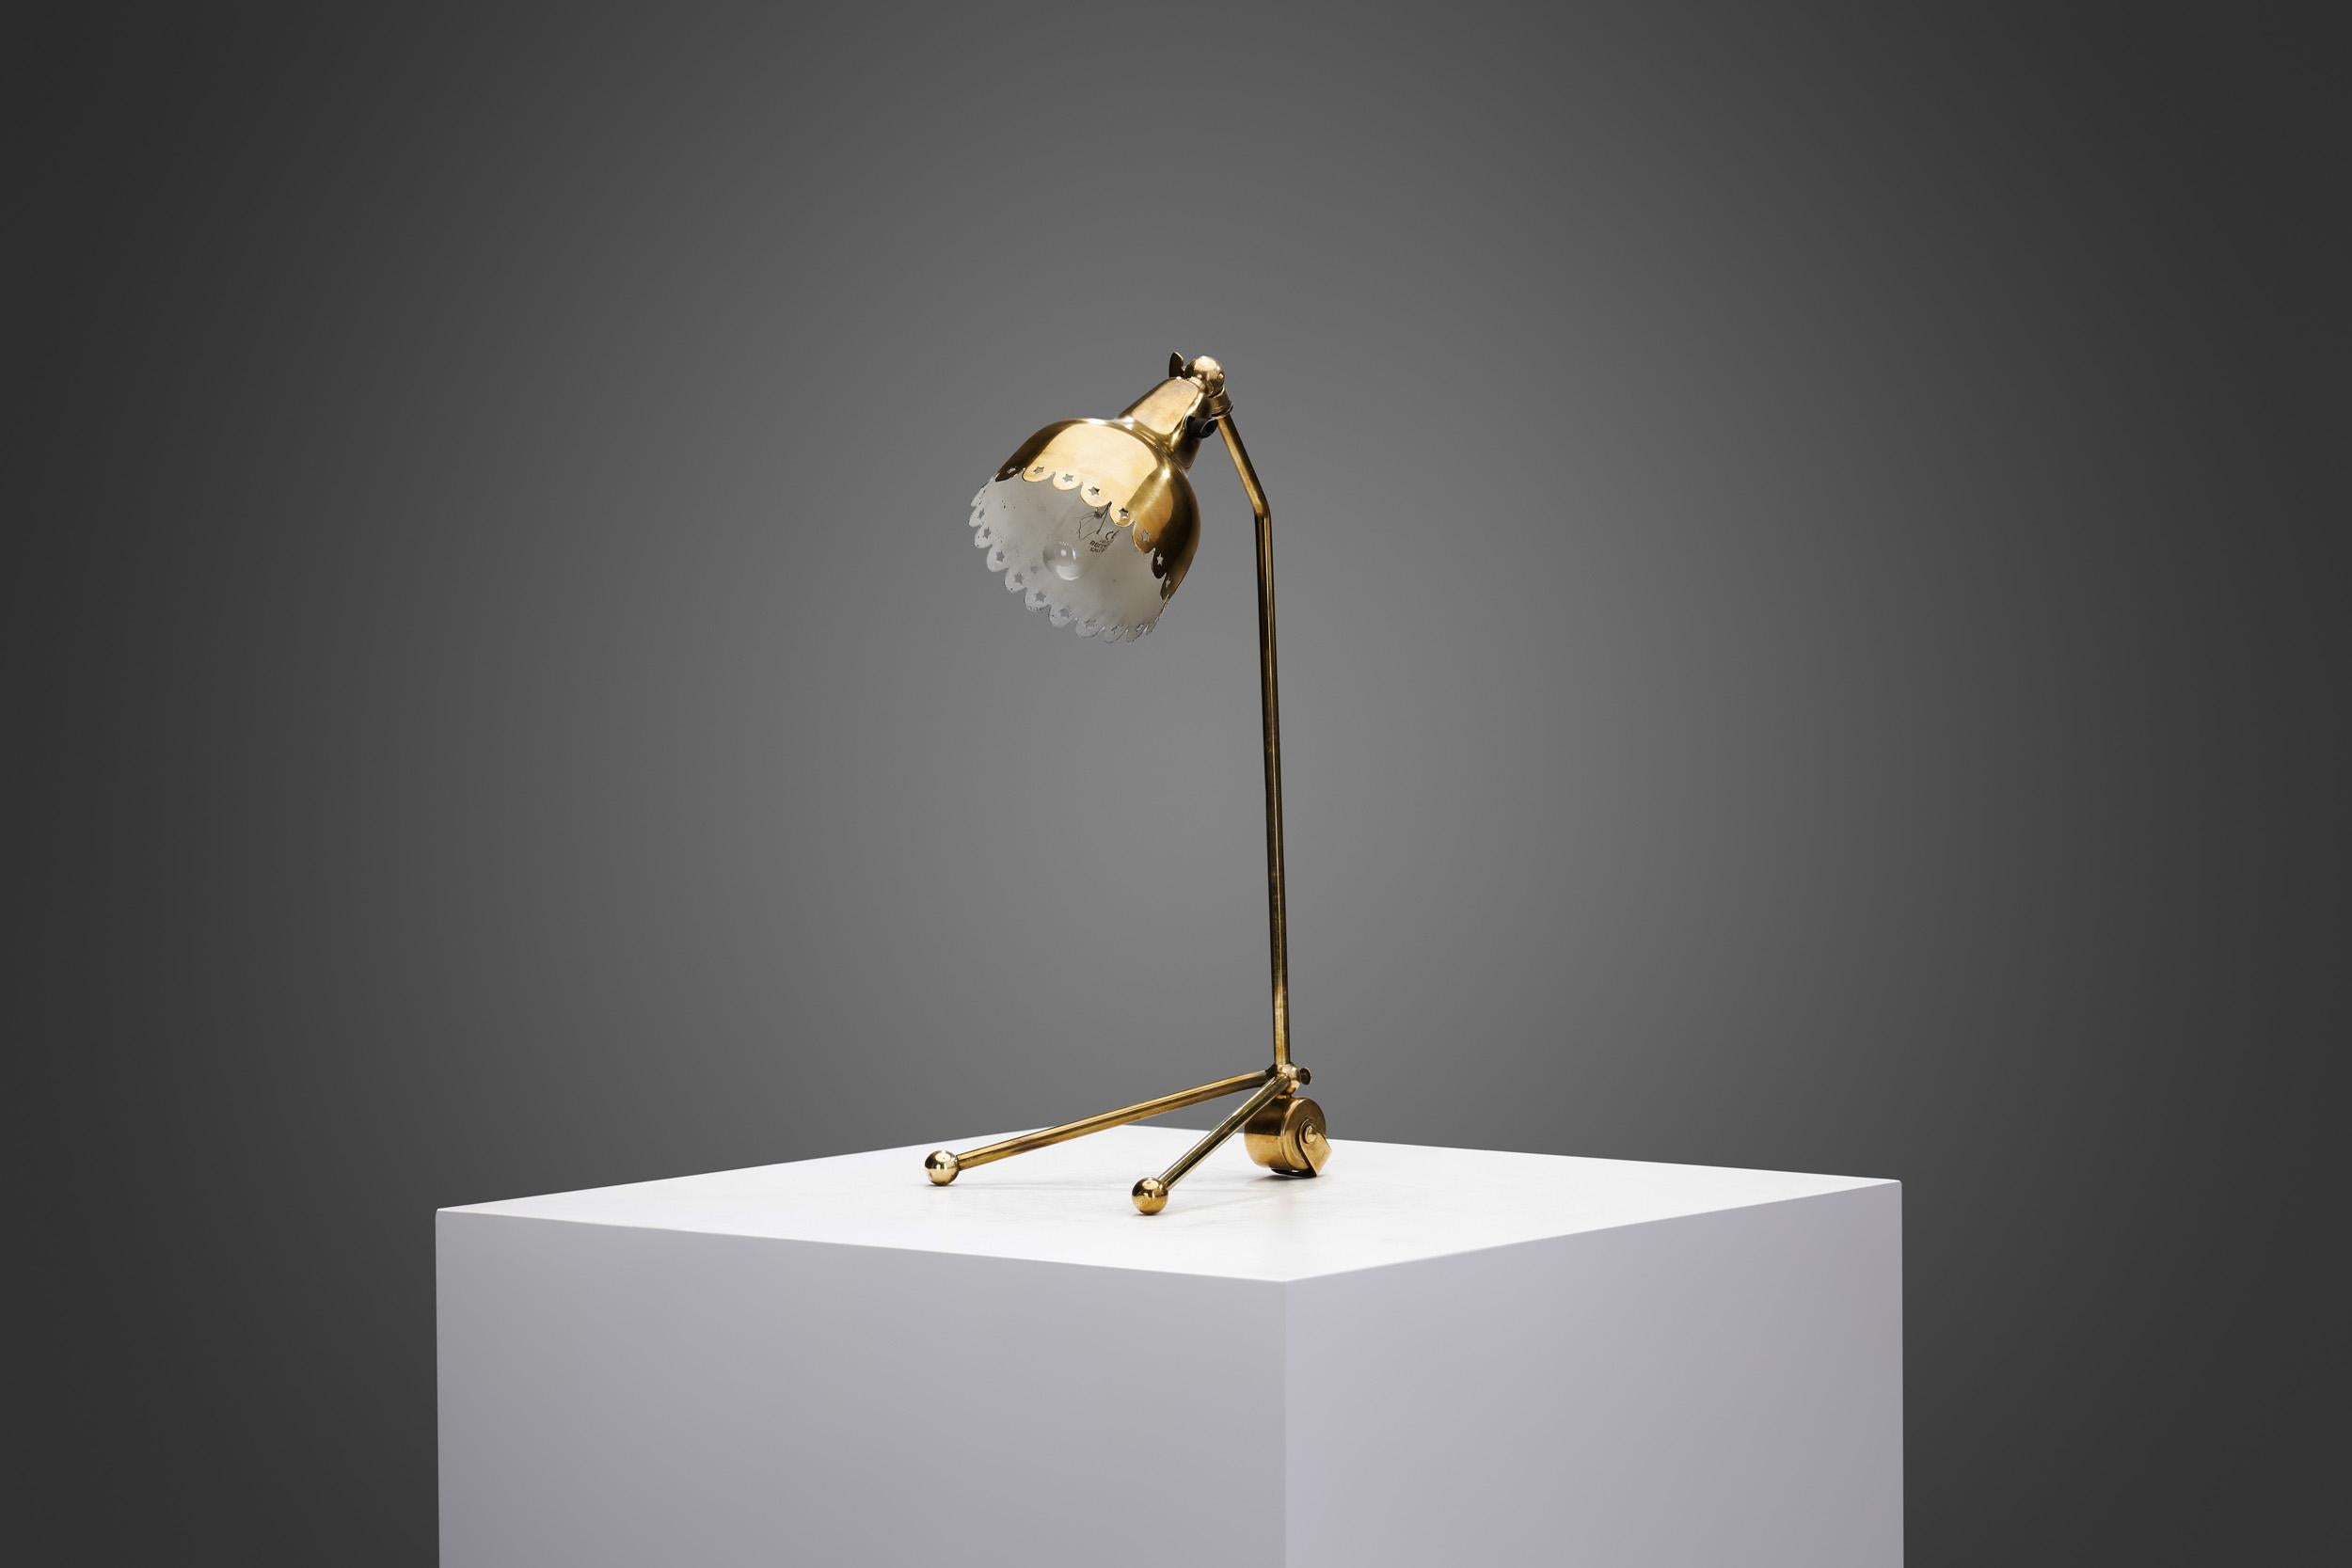 Mid-Century Modern Brass Table Lamp with Adjustable, Perforated Shade and Base, Europe ca 1950s